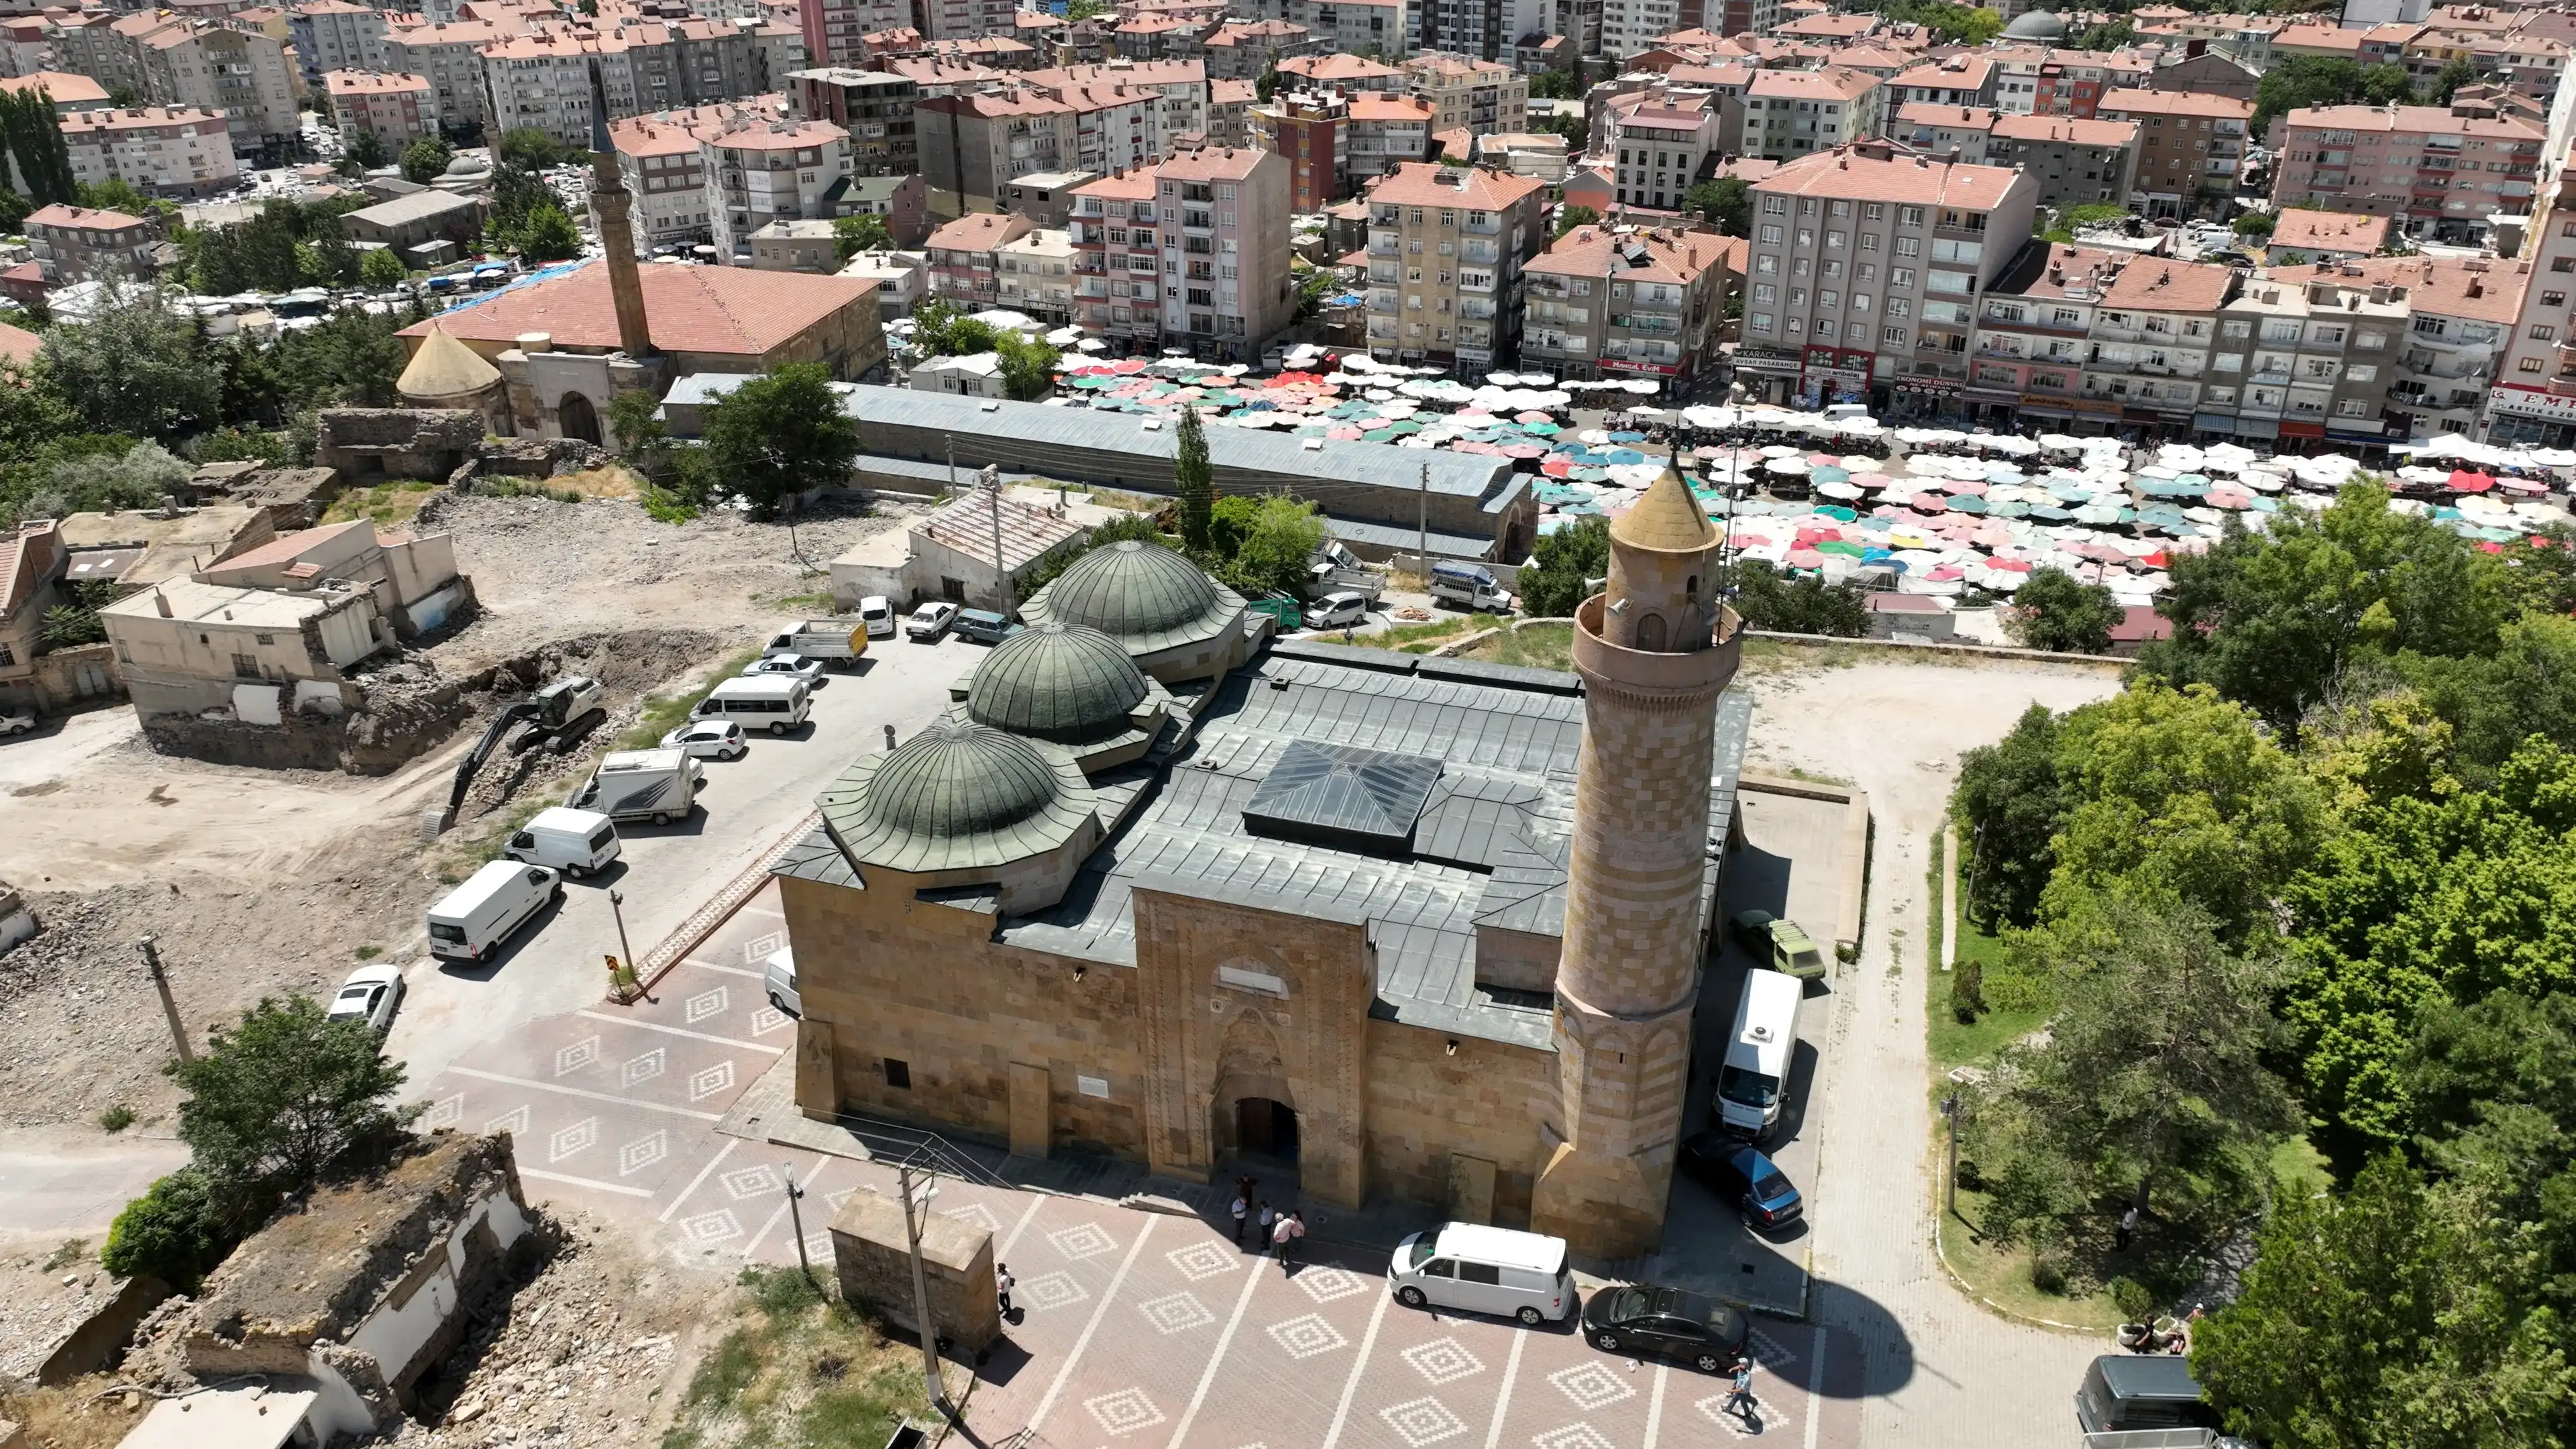 Niğde, Turkey - July 21, 2022: Niğde Alaeddin Mosque was built in 1223 during the Anatolian Seljuk period. A photo of the mosque taken with a drone.